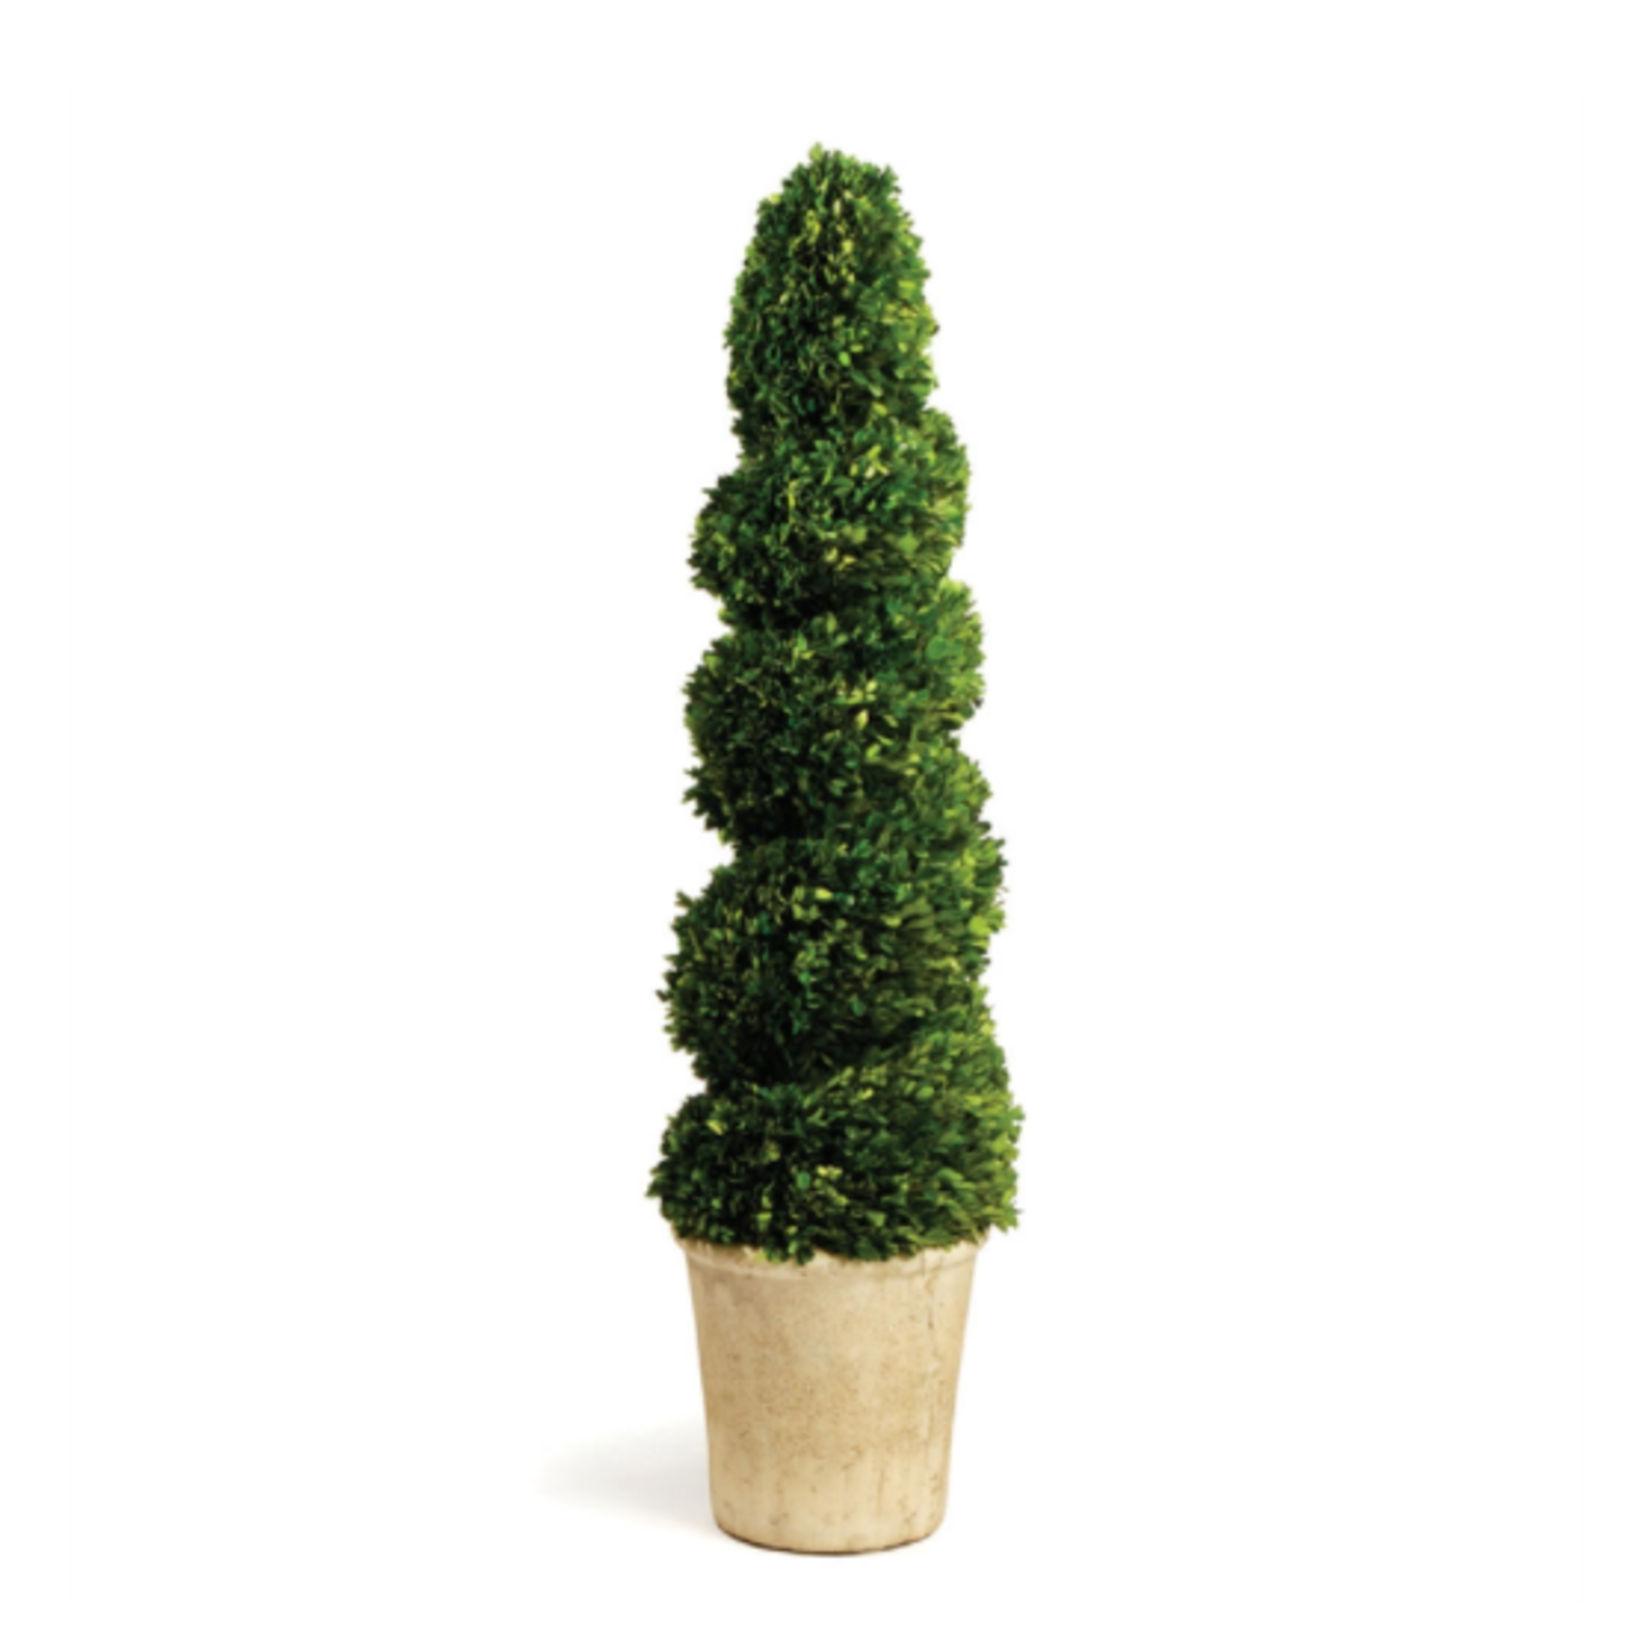 Napa Home and Garden Spiral Topiary -52.5"